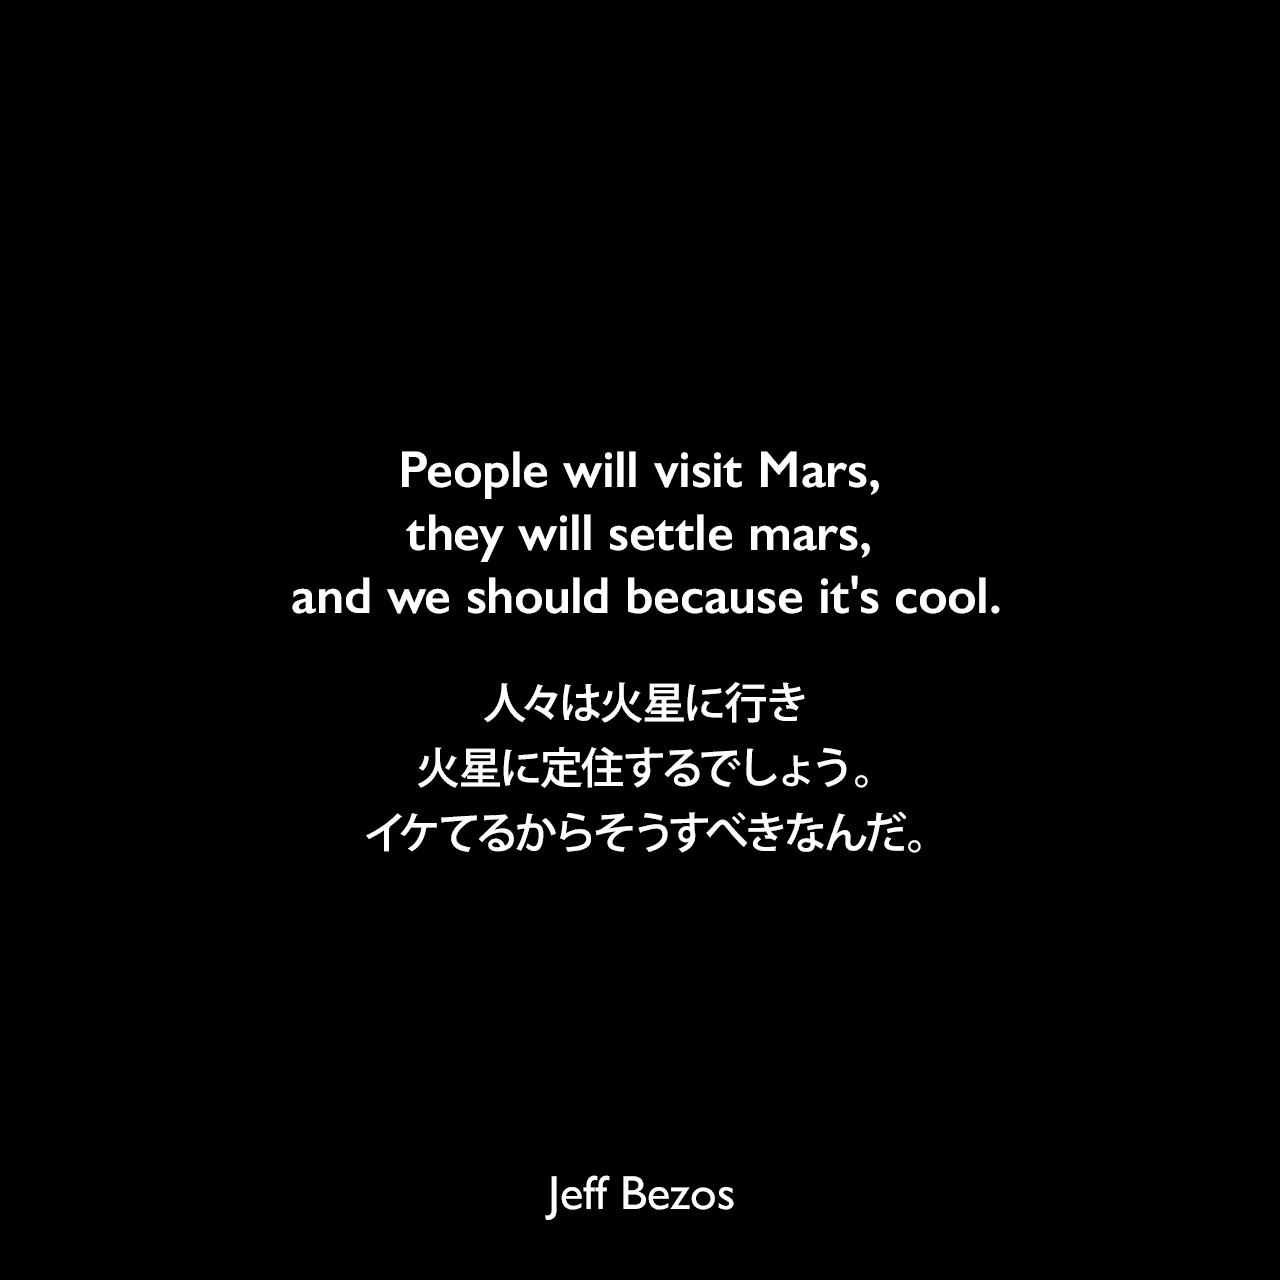 People will visit Mars, they will settle mars, and we should because it's cool.人々は火星に行き、火星に定住するでしょう。イケてるからそうすべきなんだ。Jeff Bezos